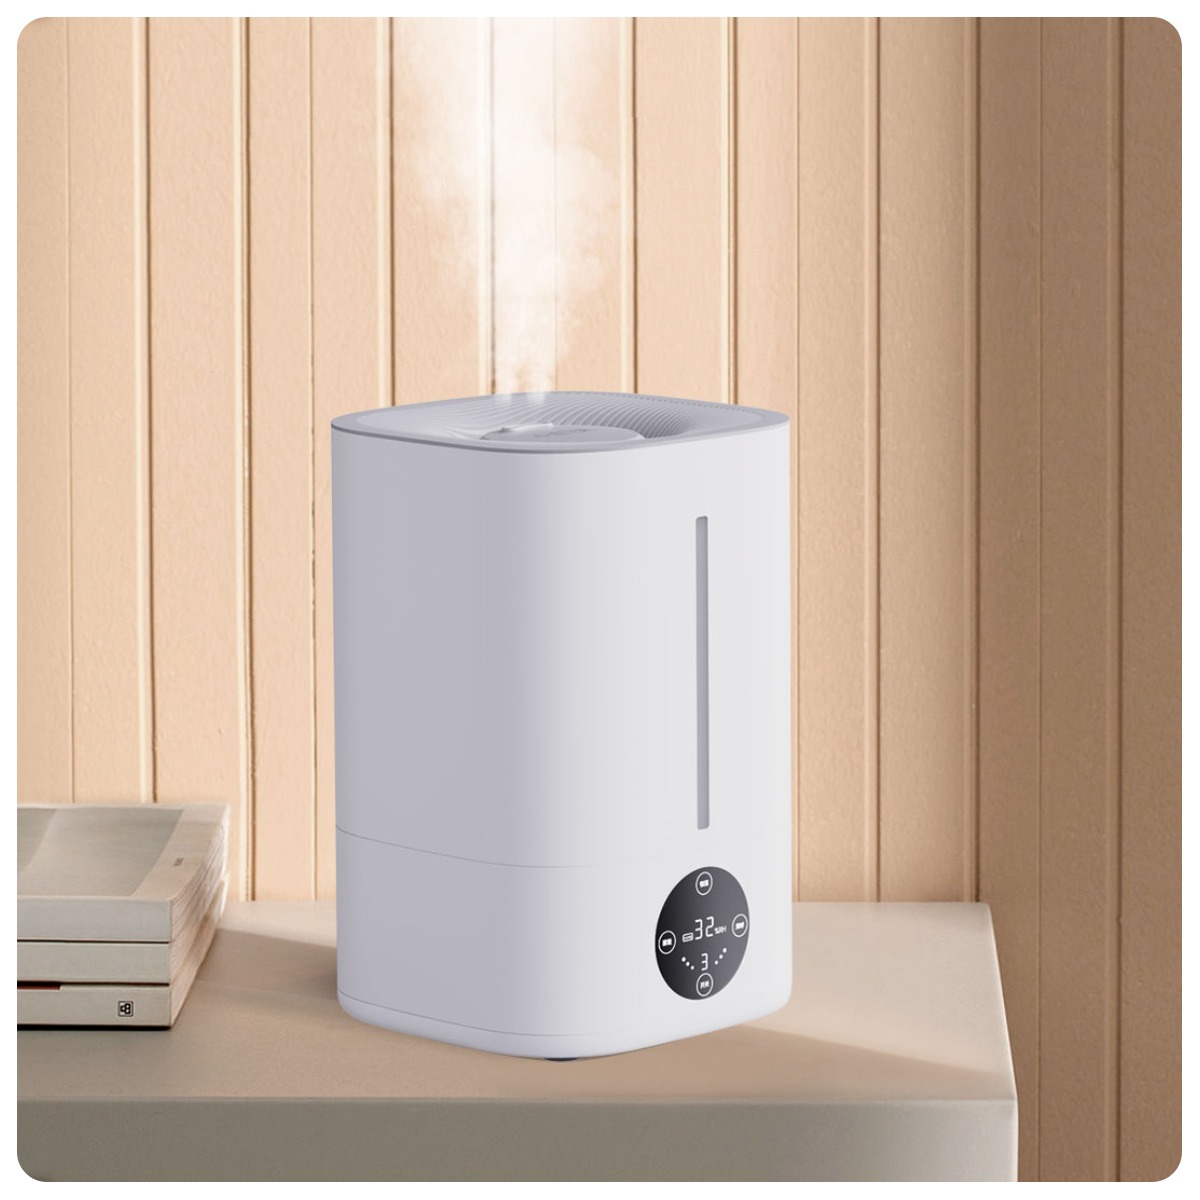 Lydsto-Humidifier-5L-F200S-02